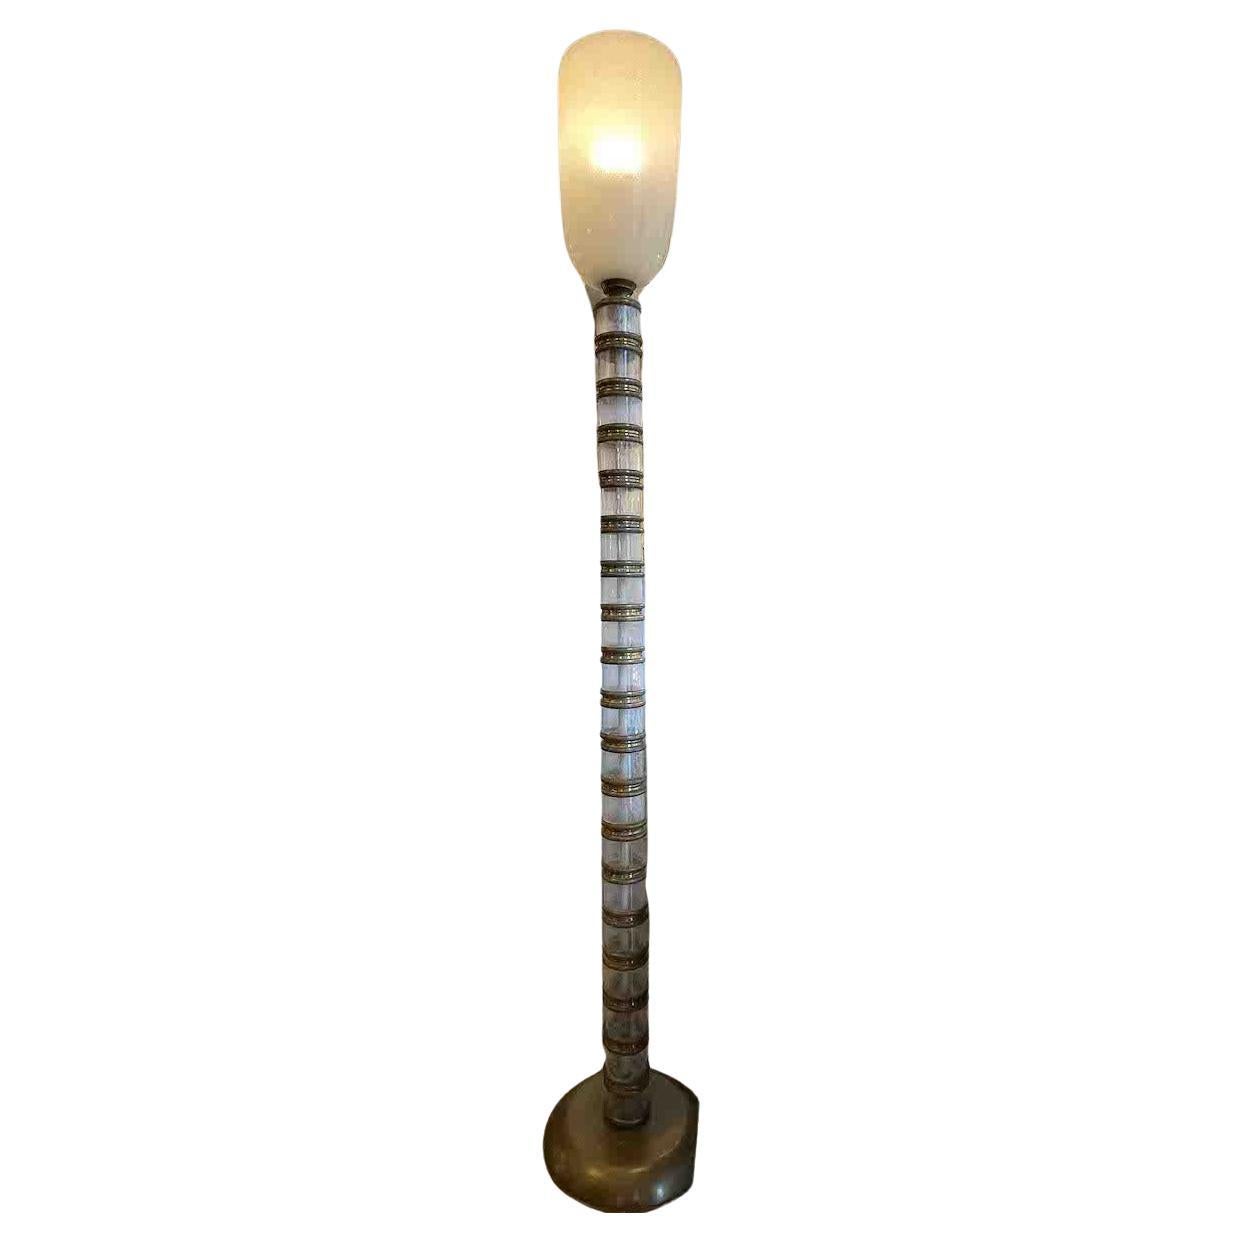 Venini 1930s pulegoso glass and brass floor lamp.
The base of the lamp was produced in patinated brass and was made by Martinuzzi for Venini.

The pulegoso glass is filled with bubbles obtained by introducing a substance into the molten mass that